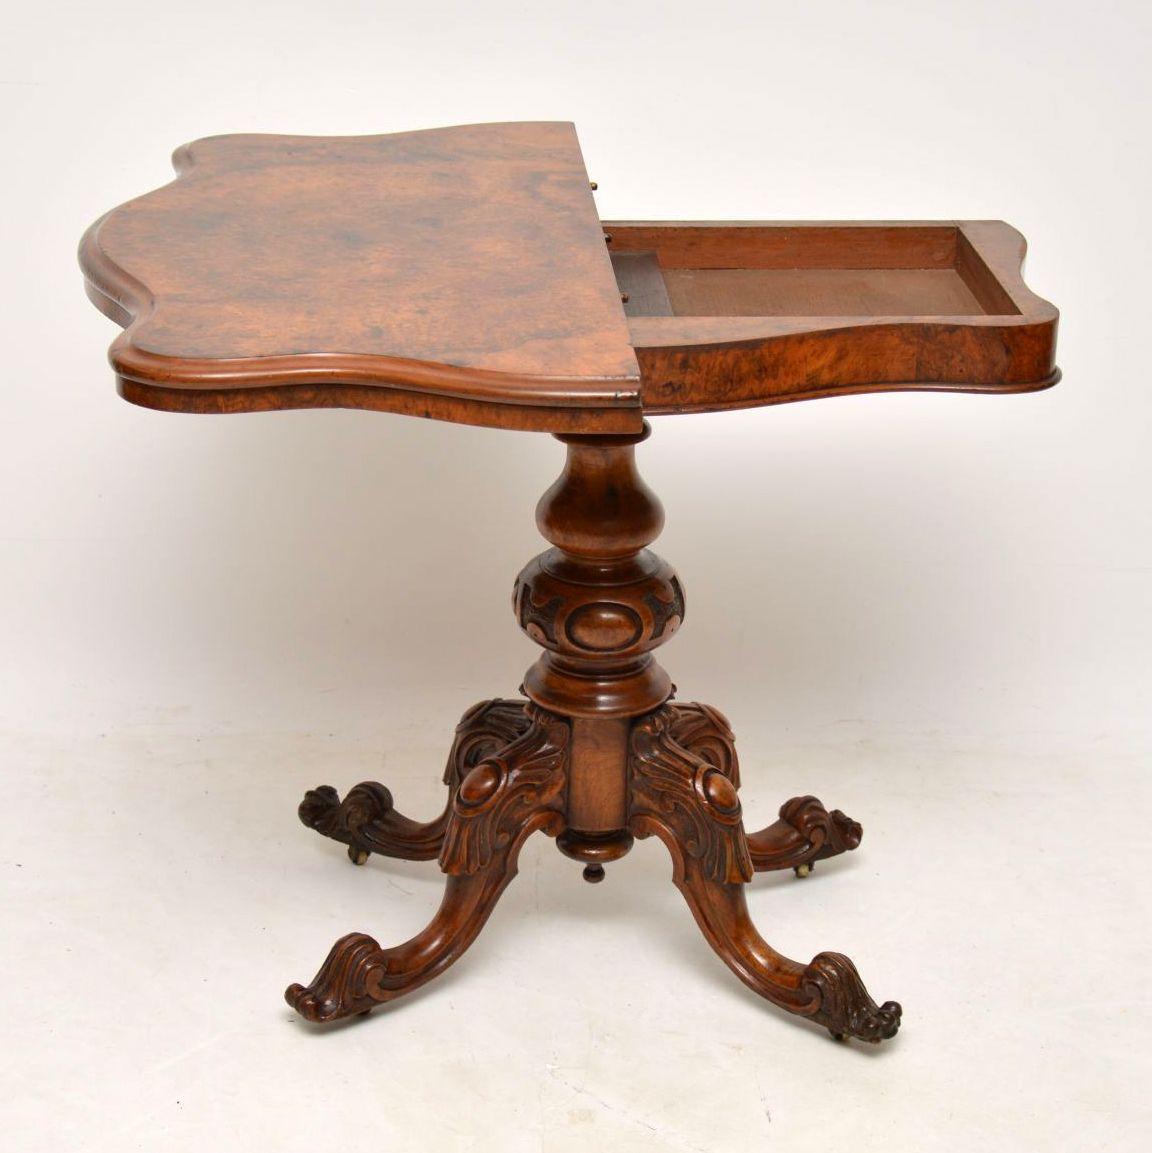 High quality antique Victorian walnut card table dating to around the 1860s period & in great condition. It has a serpentine shaped burr walnut top, which spins around & folds over to be supported by the frame, which also has a compartment